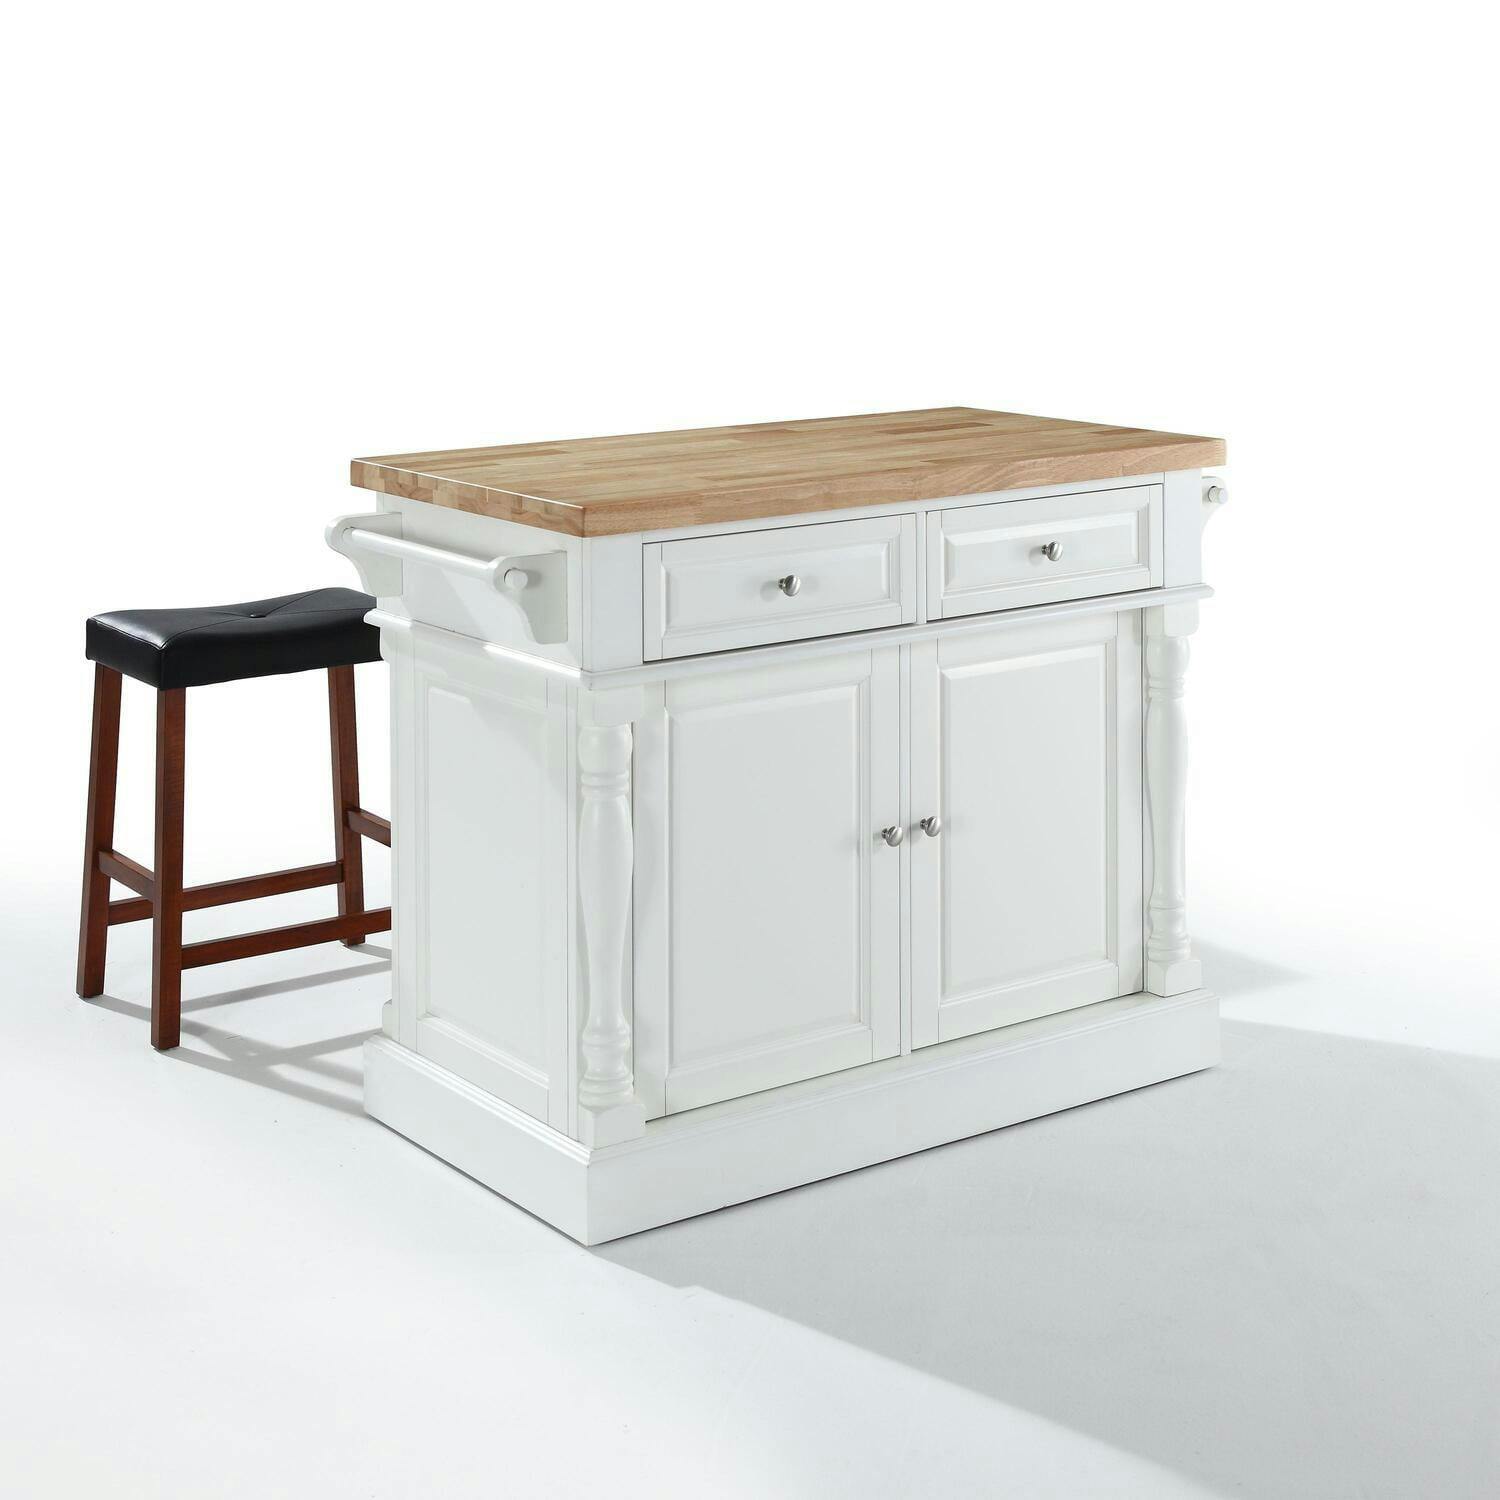 Oxford Solid Wood White Kitchen Island with Butcher Block and Saddle Stools